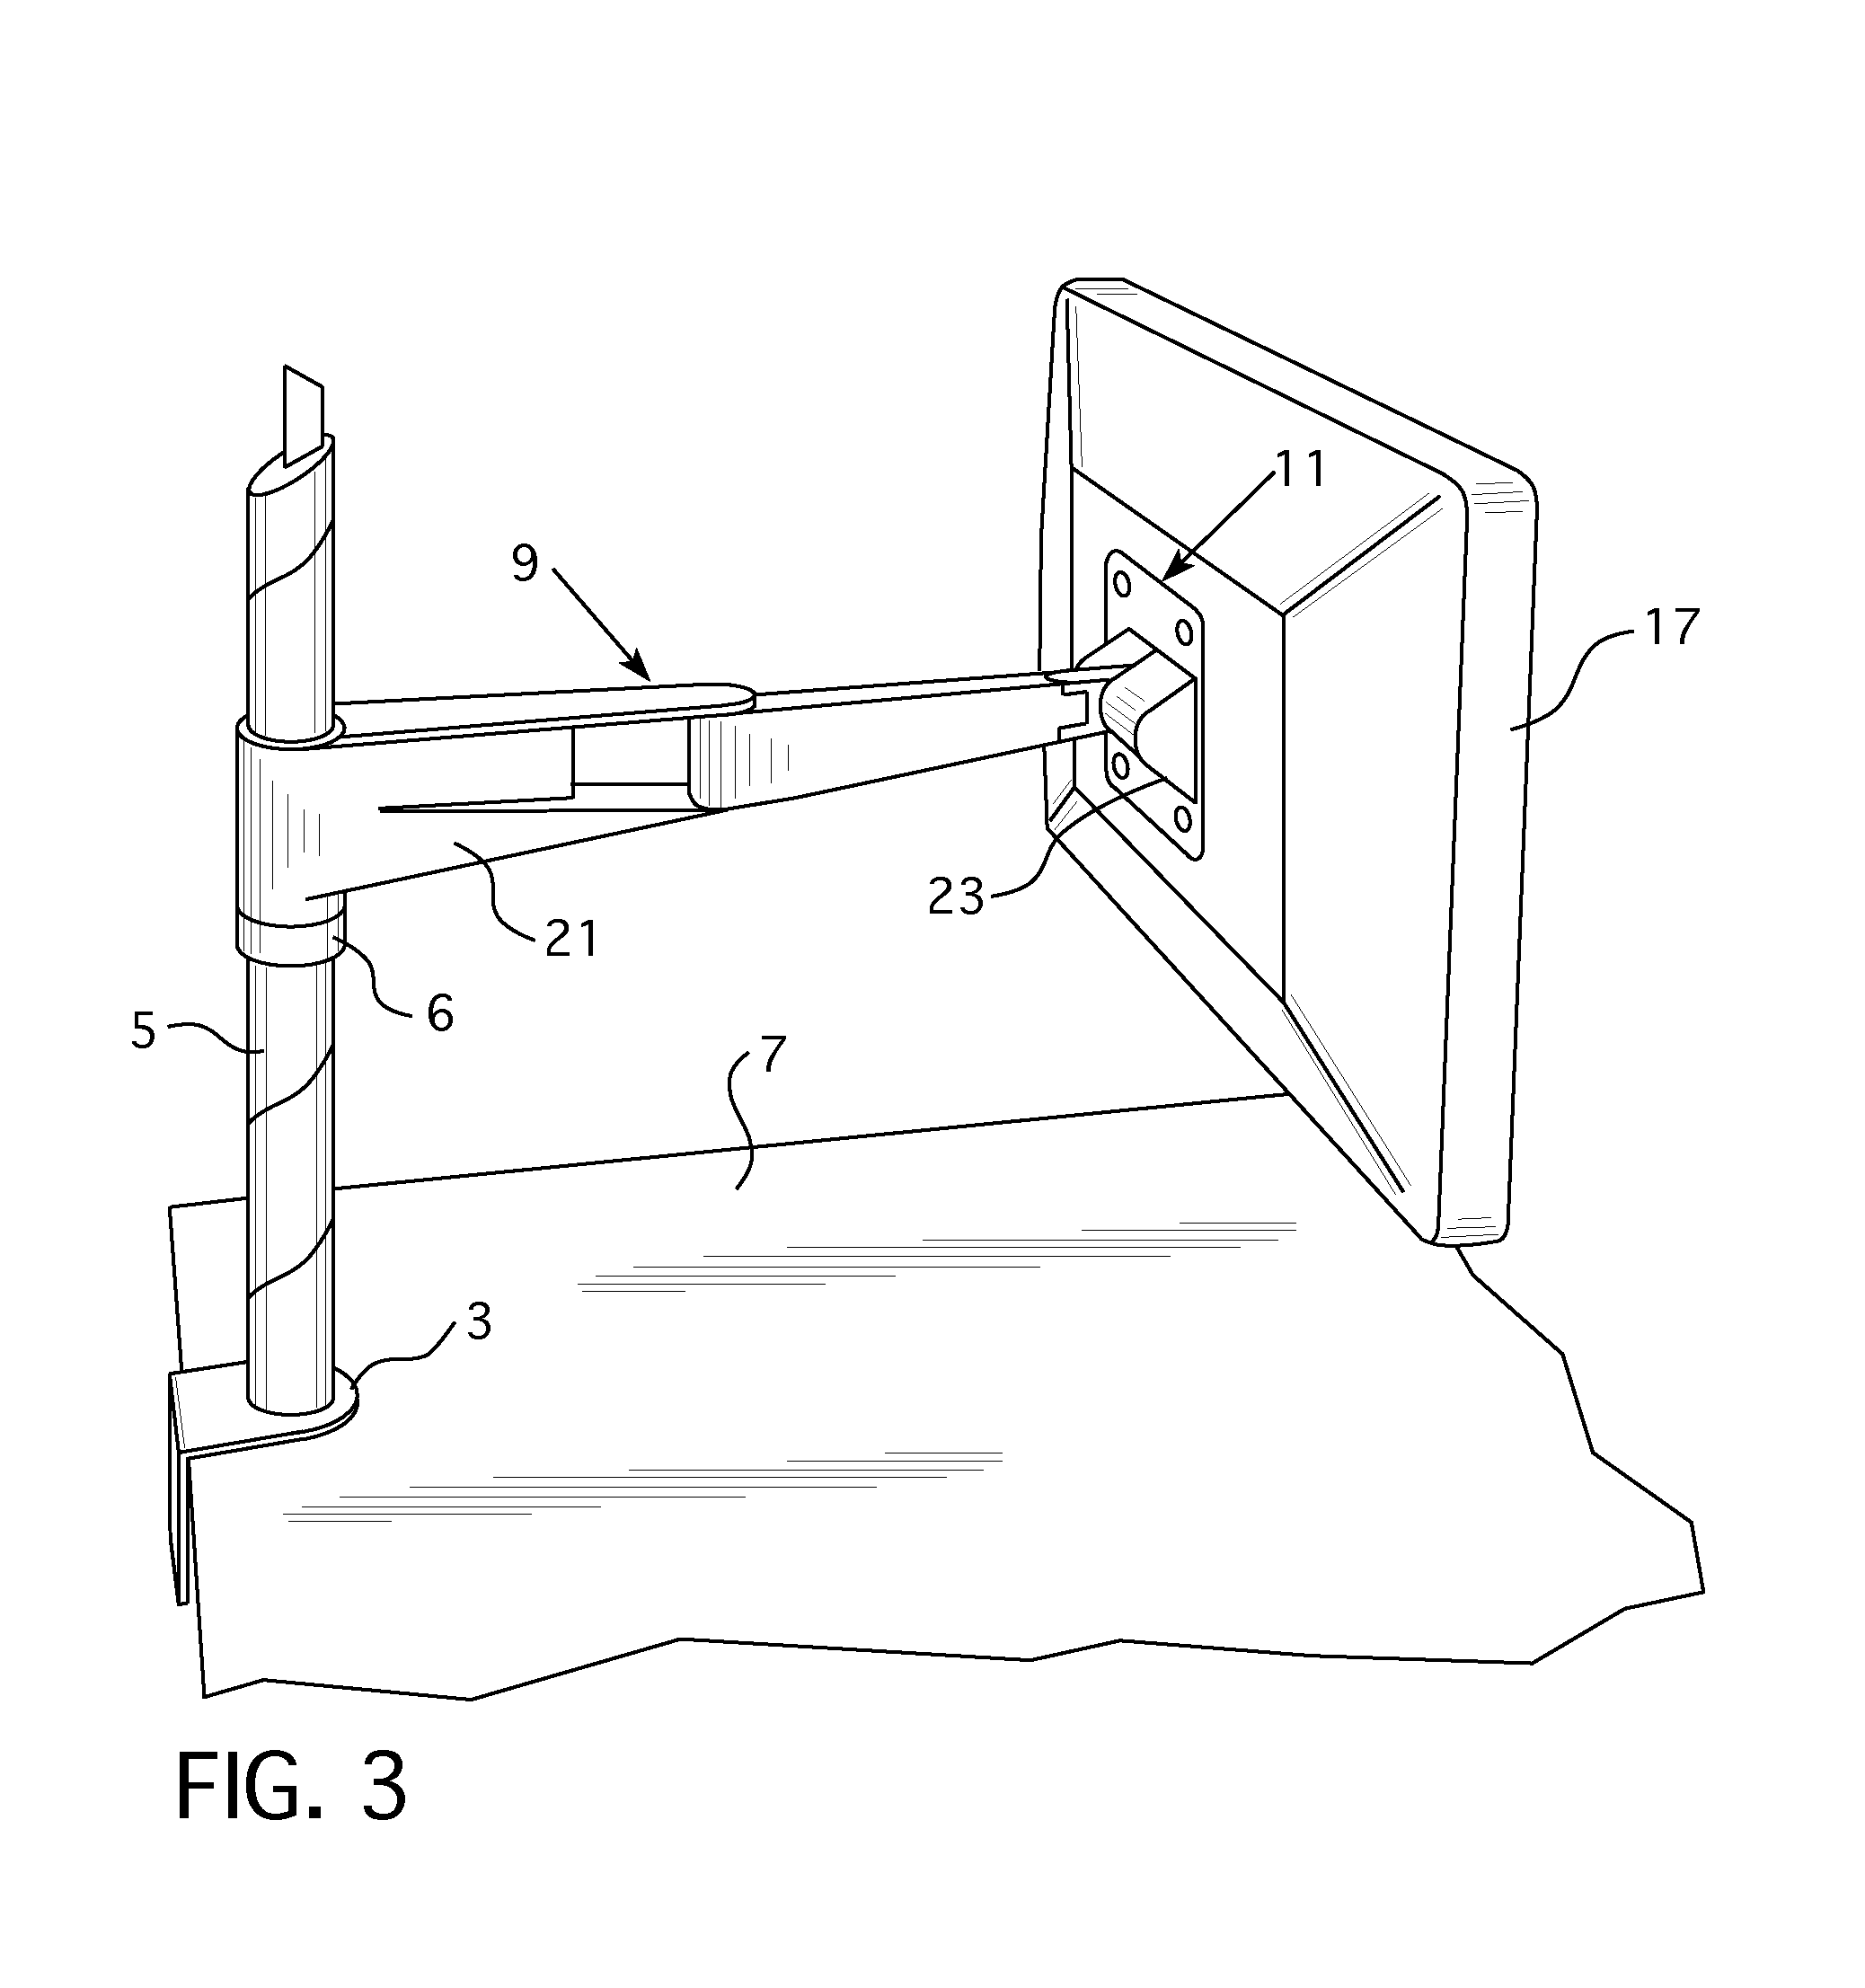 Friction adjustment mechanism for a support apparatus